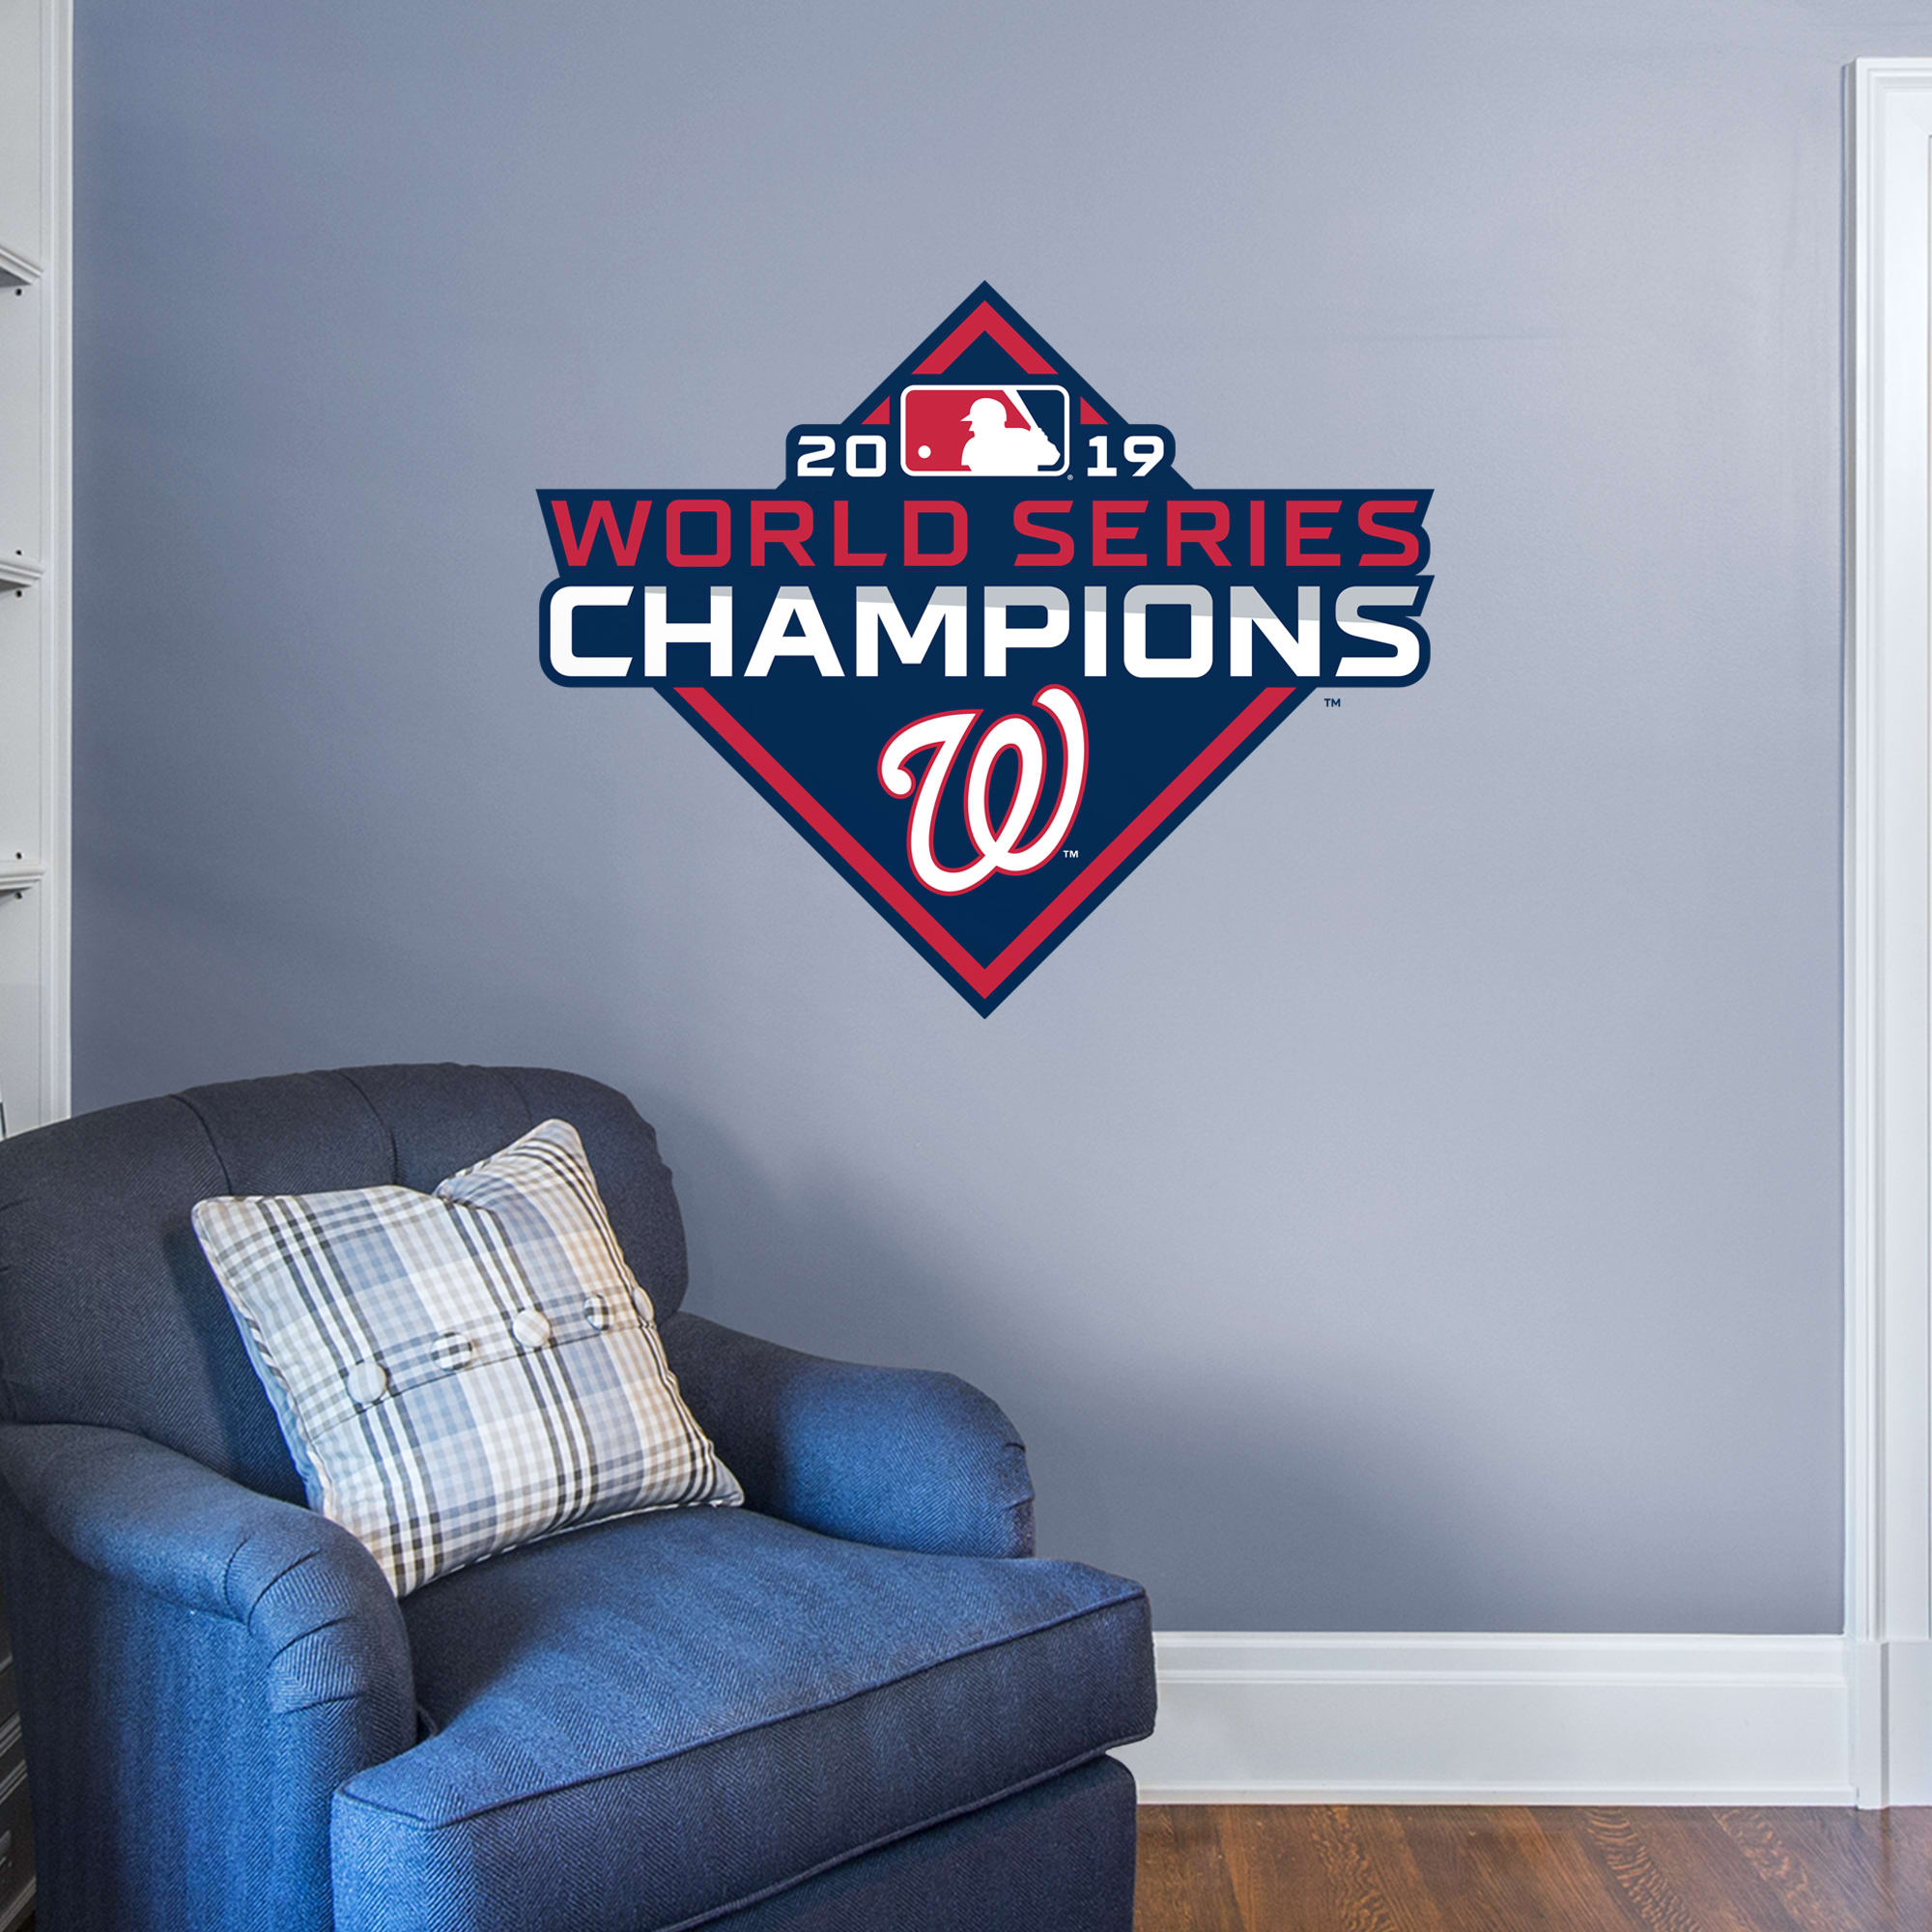 Washington Nationals: 2019 World Series Champions Logo - Officially Licensed MLB Removable Wall Decal Giant Logo (47"W x 39"H) b